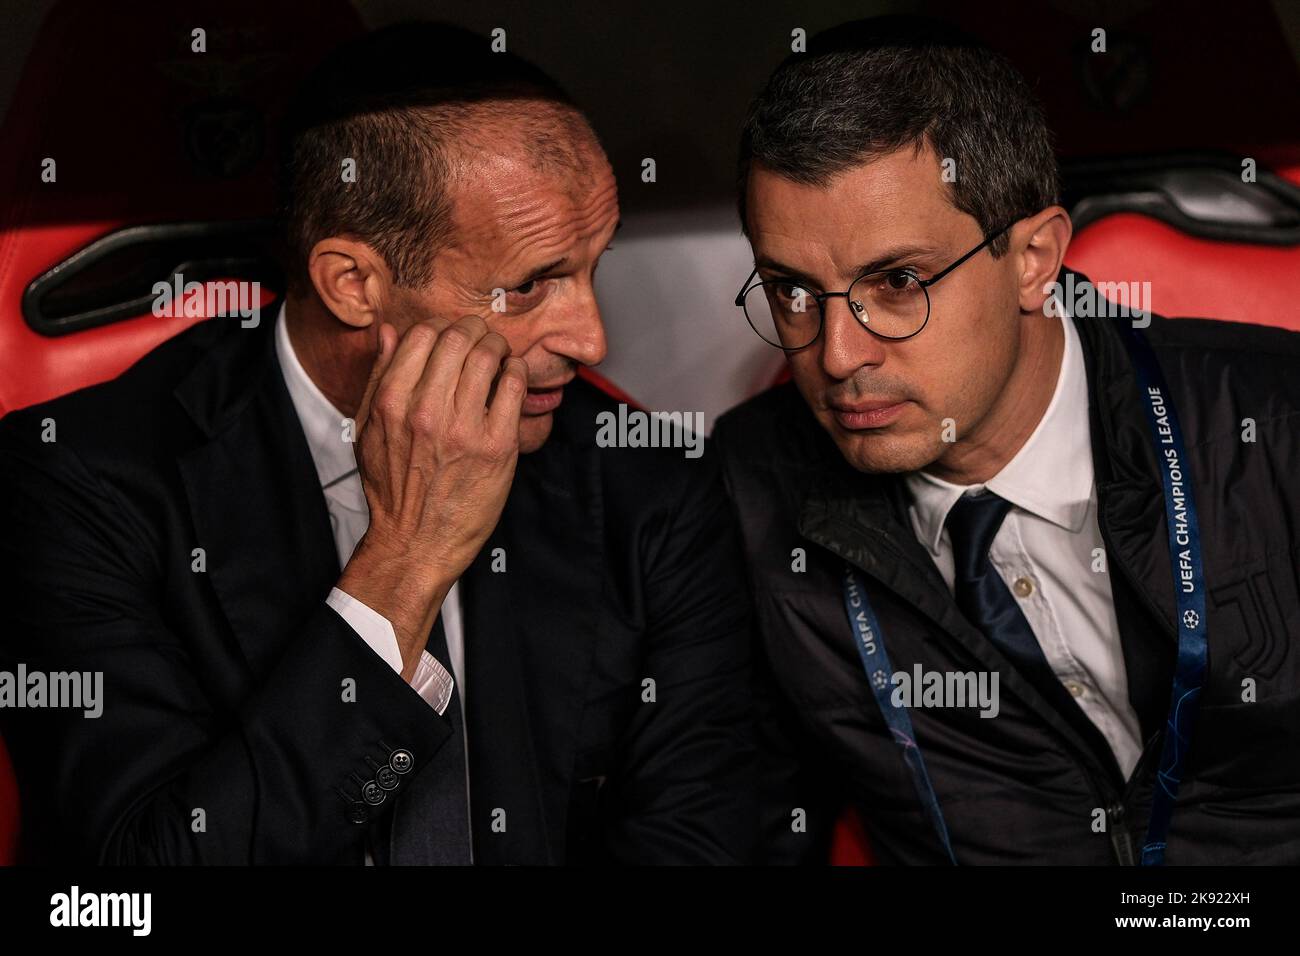 Lisbon, Portugal. 25th Oct, 2022. Massimiliano Allegri coach of Juventus FC during the Champions League Group H football match between Benfica and Juventus FC at estadio da Luz in Lisbon (Portugal), October 25h, 2022. Photo Federico Tardito/Insidefoto Credit: Insidefoto di andrea staccioli/Alamy Live News Stock Photo